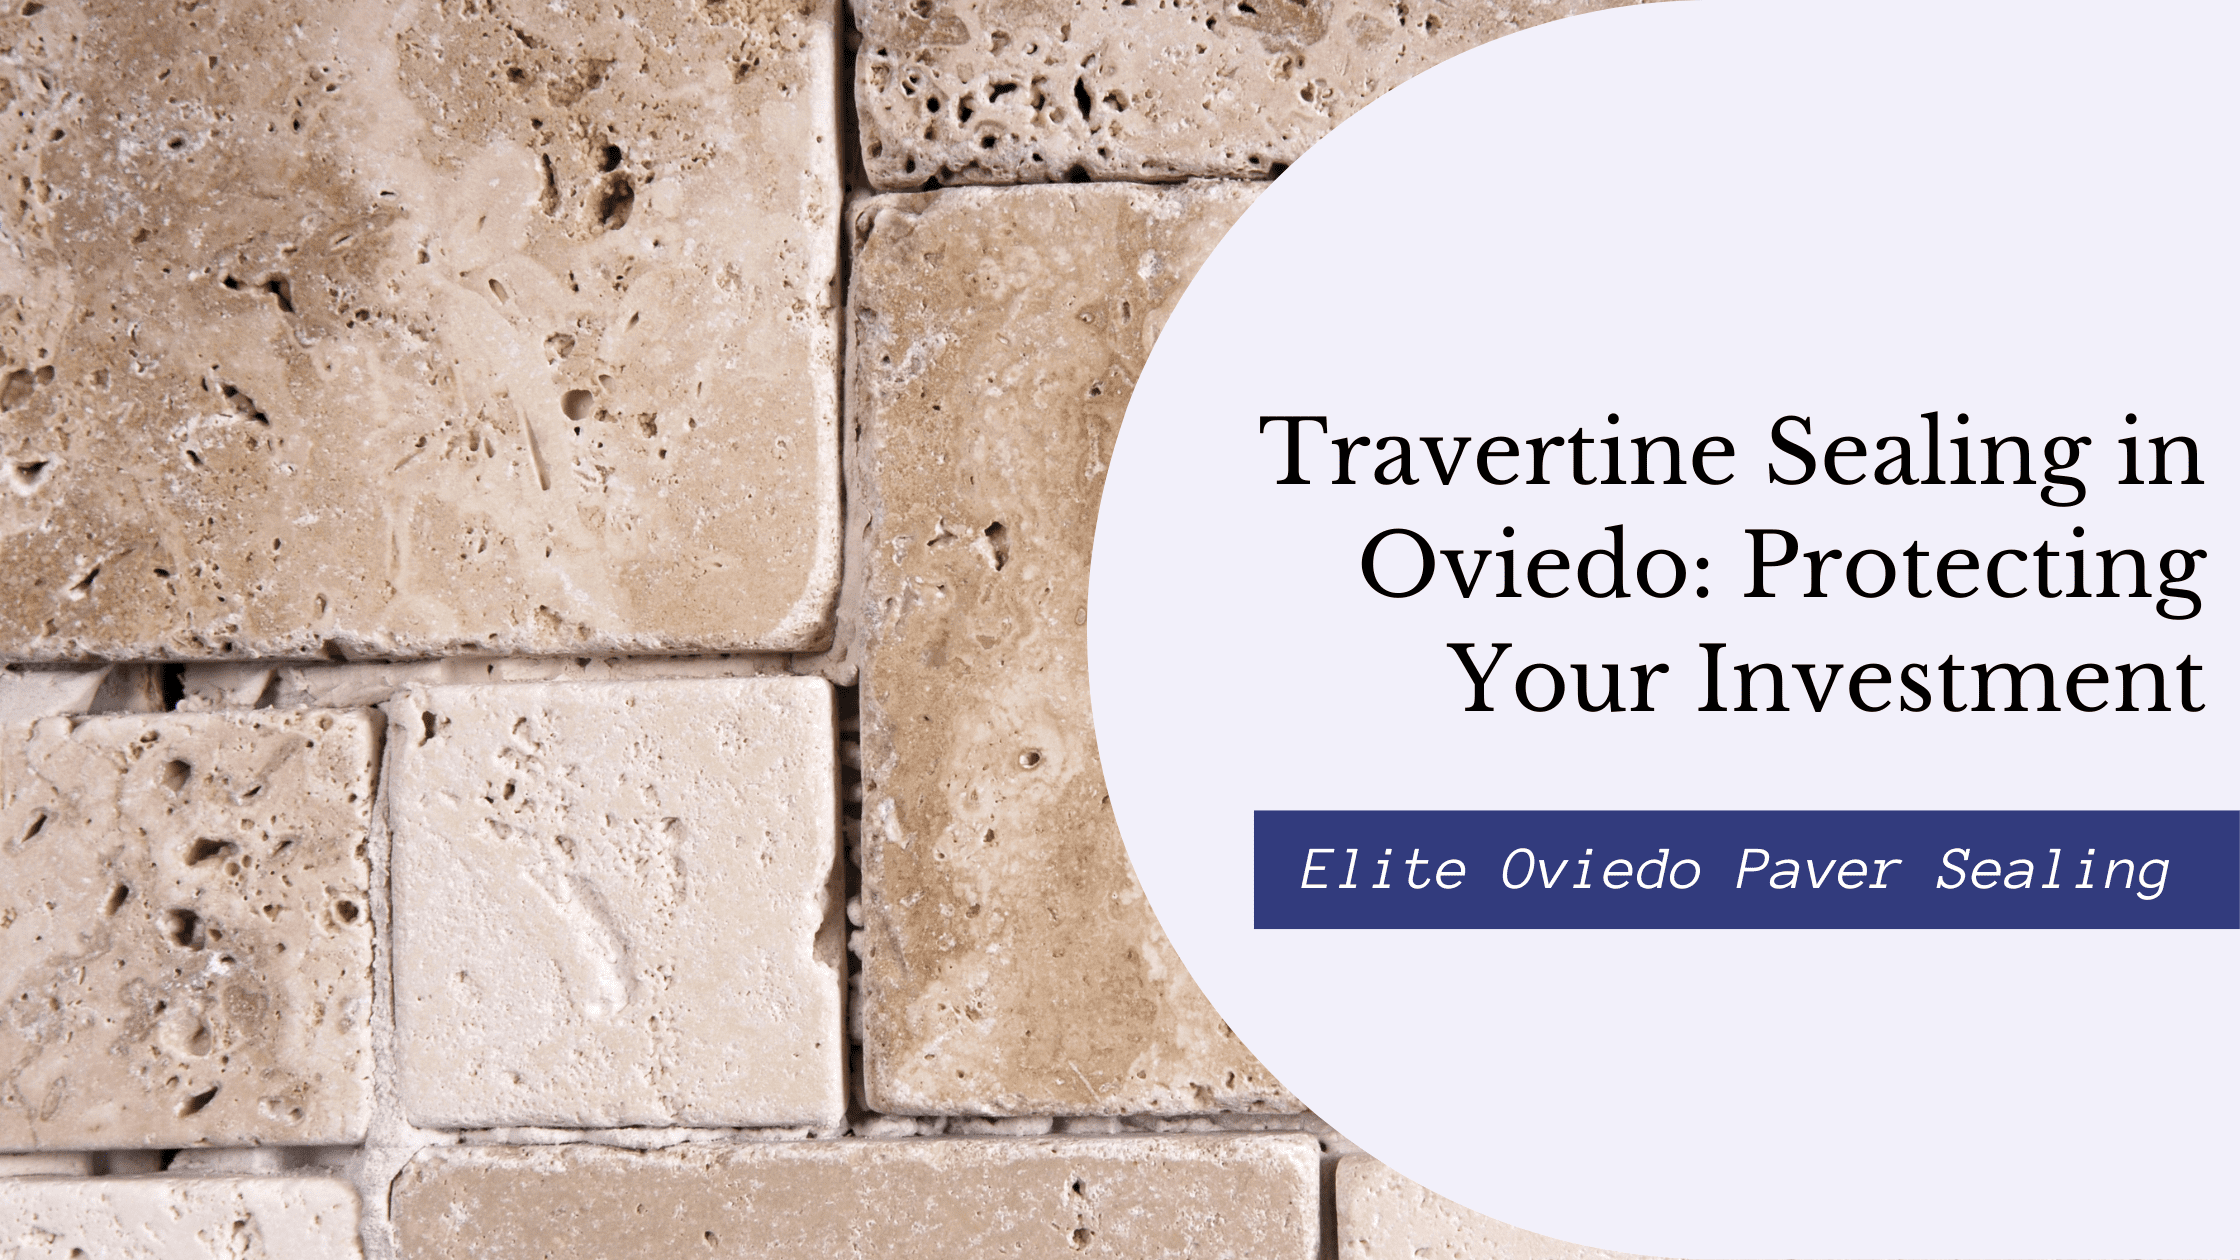 Travertine Sealing in Oviedo: Protecting Your Investment